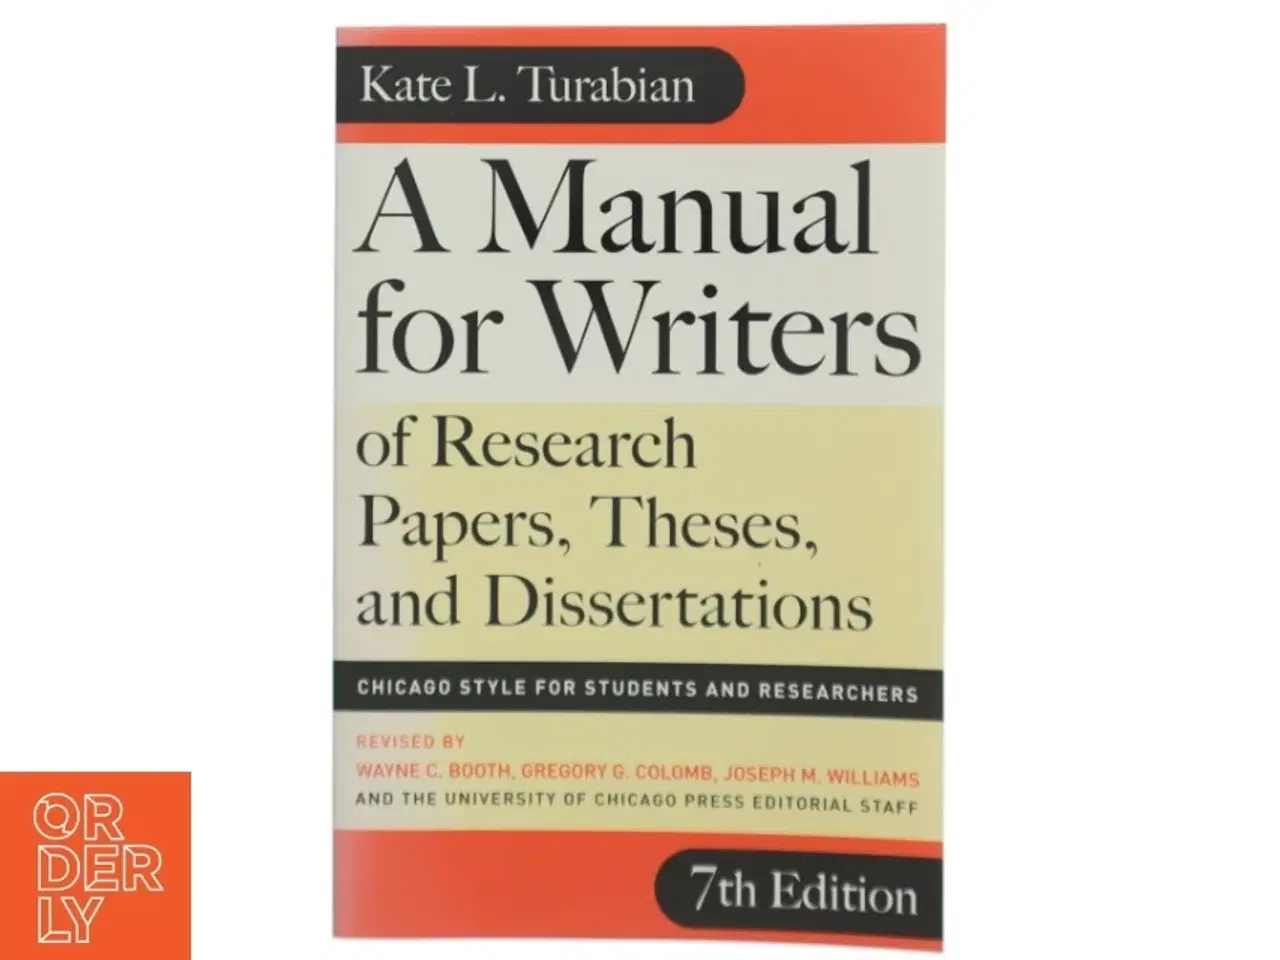 Billede 1 - A manual for writers of research papers, theses, and dissertations : Chicago style for students and researchers af Kate L. Turabian (Bog)